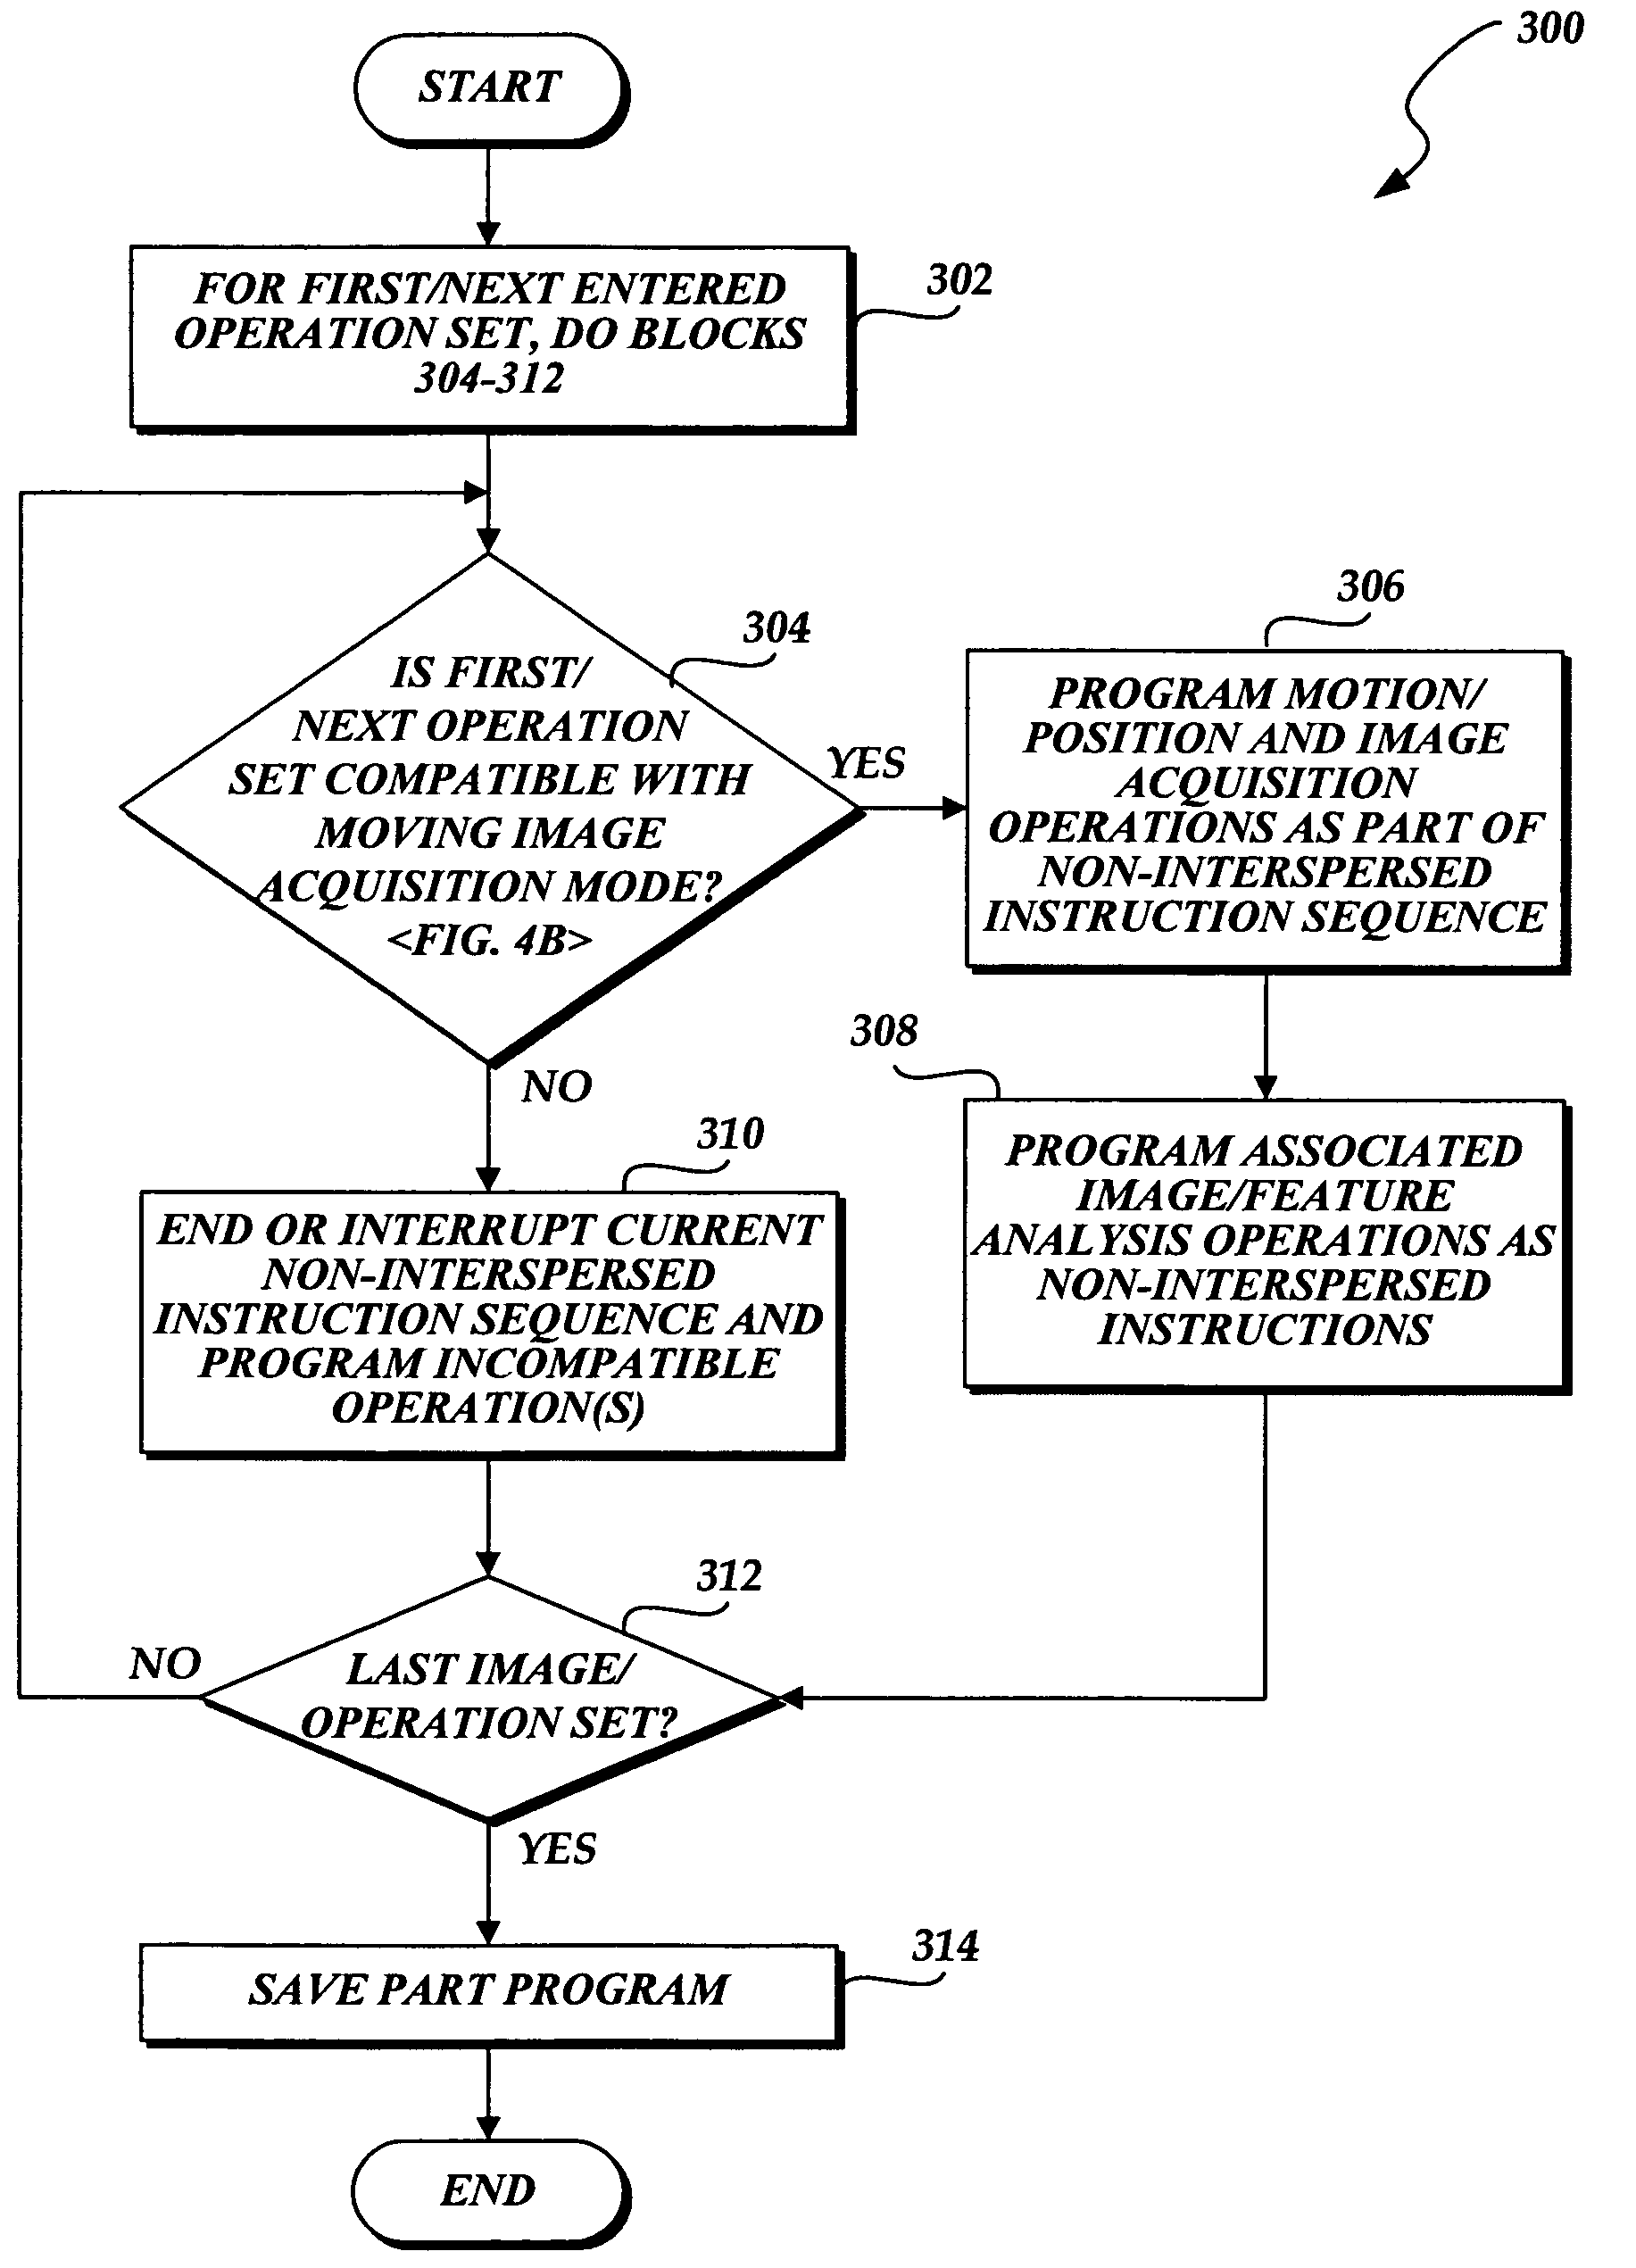 System and method for programming interrupting operations during moving image acquisition sequences in a vision system